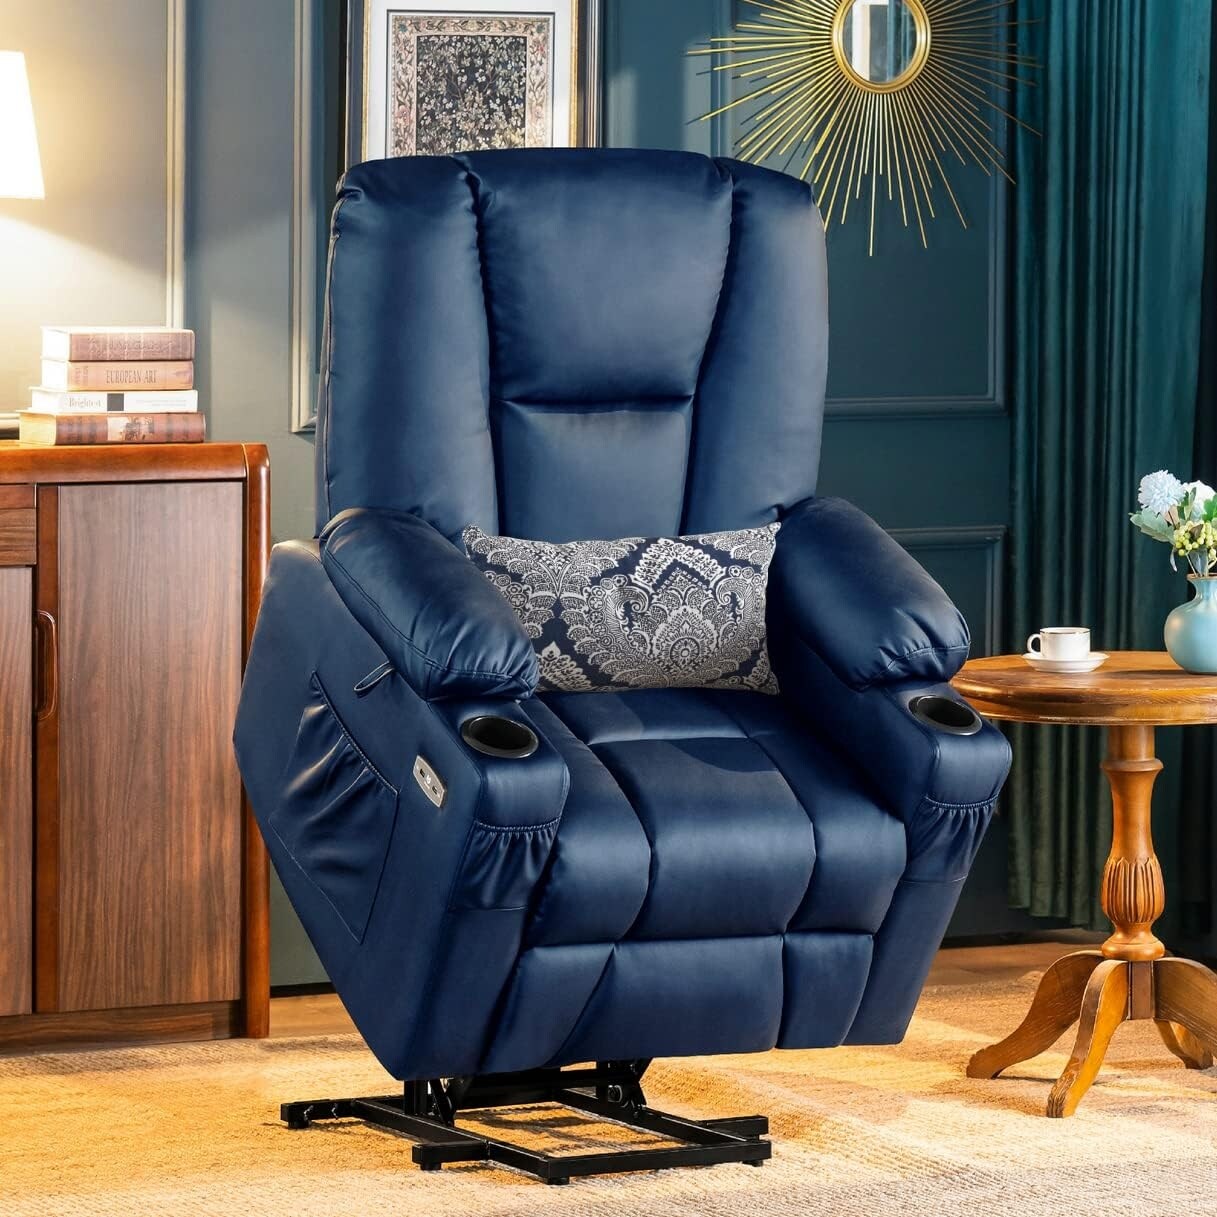 https://ak1.ostkcdn.com/images/products/is/images/direct/1559535433533b5baad27c1c30349d588b81a87b/Mcombo-Electric-Power-Lift-Recliner-Chair-with-Extended-Footrest-for-Elderly%2C-Lumbar-Pillow%2C-Cup-Holders%2C-Faux-Leather-7507.jpg